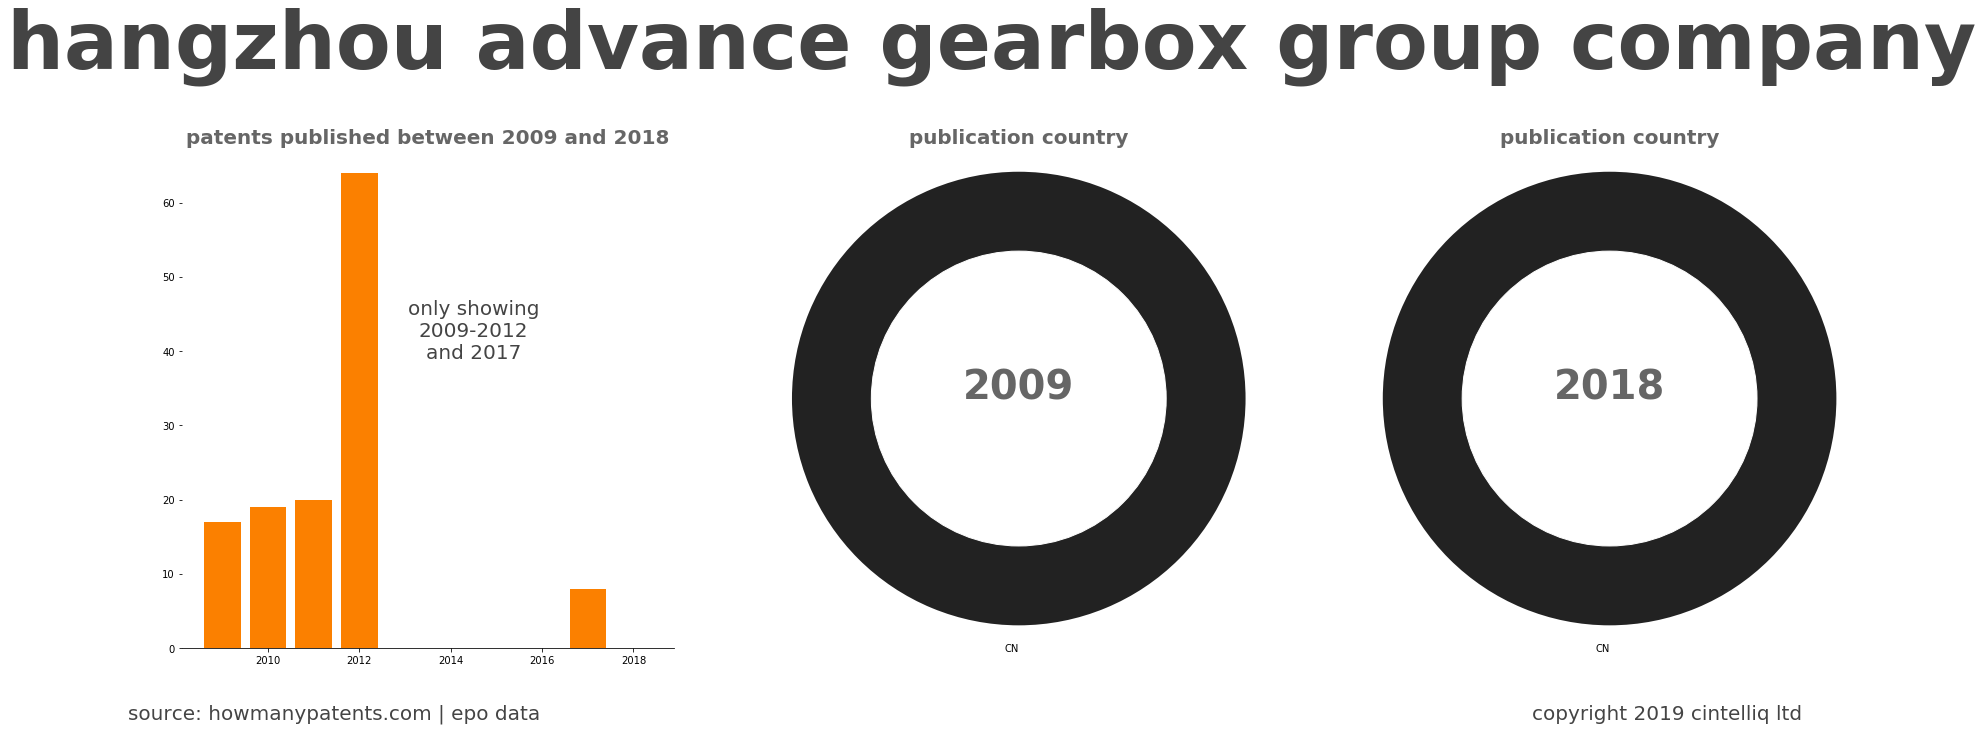 summary of patents for Hangzhou Advance Gearbox Group Company